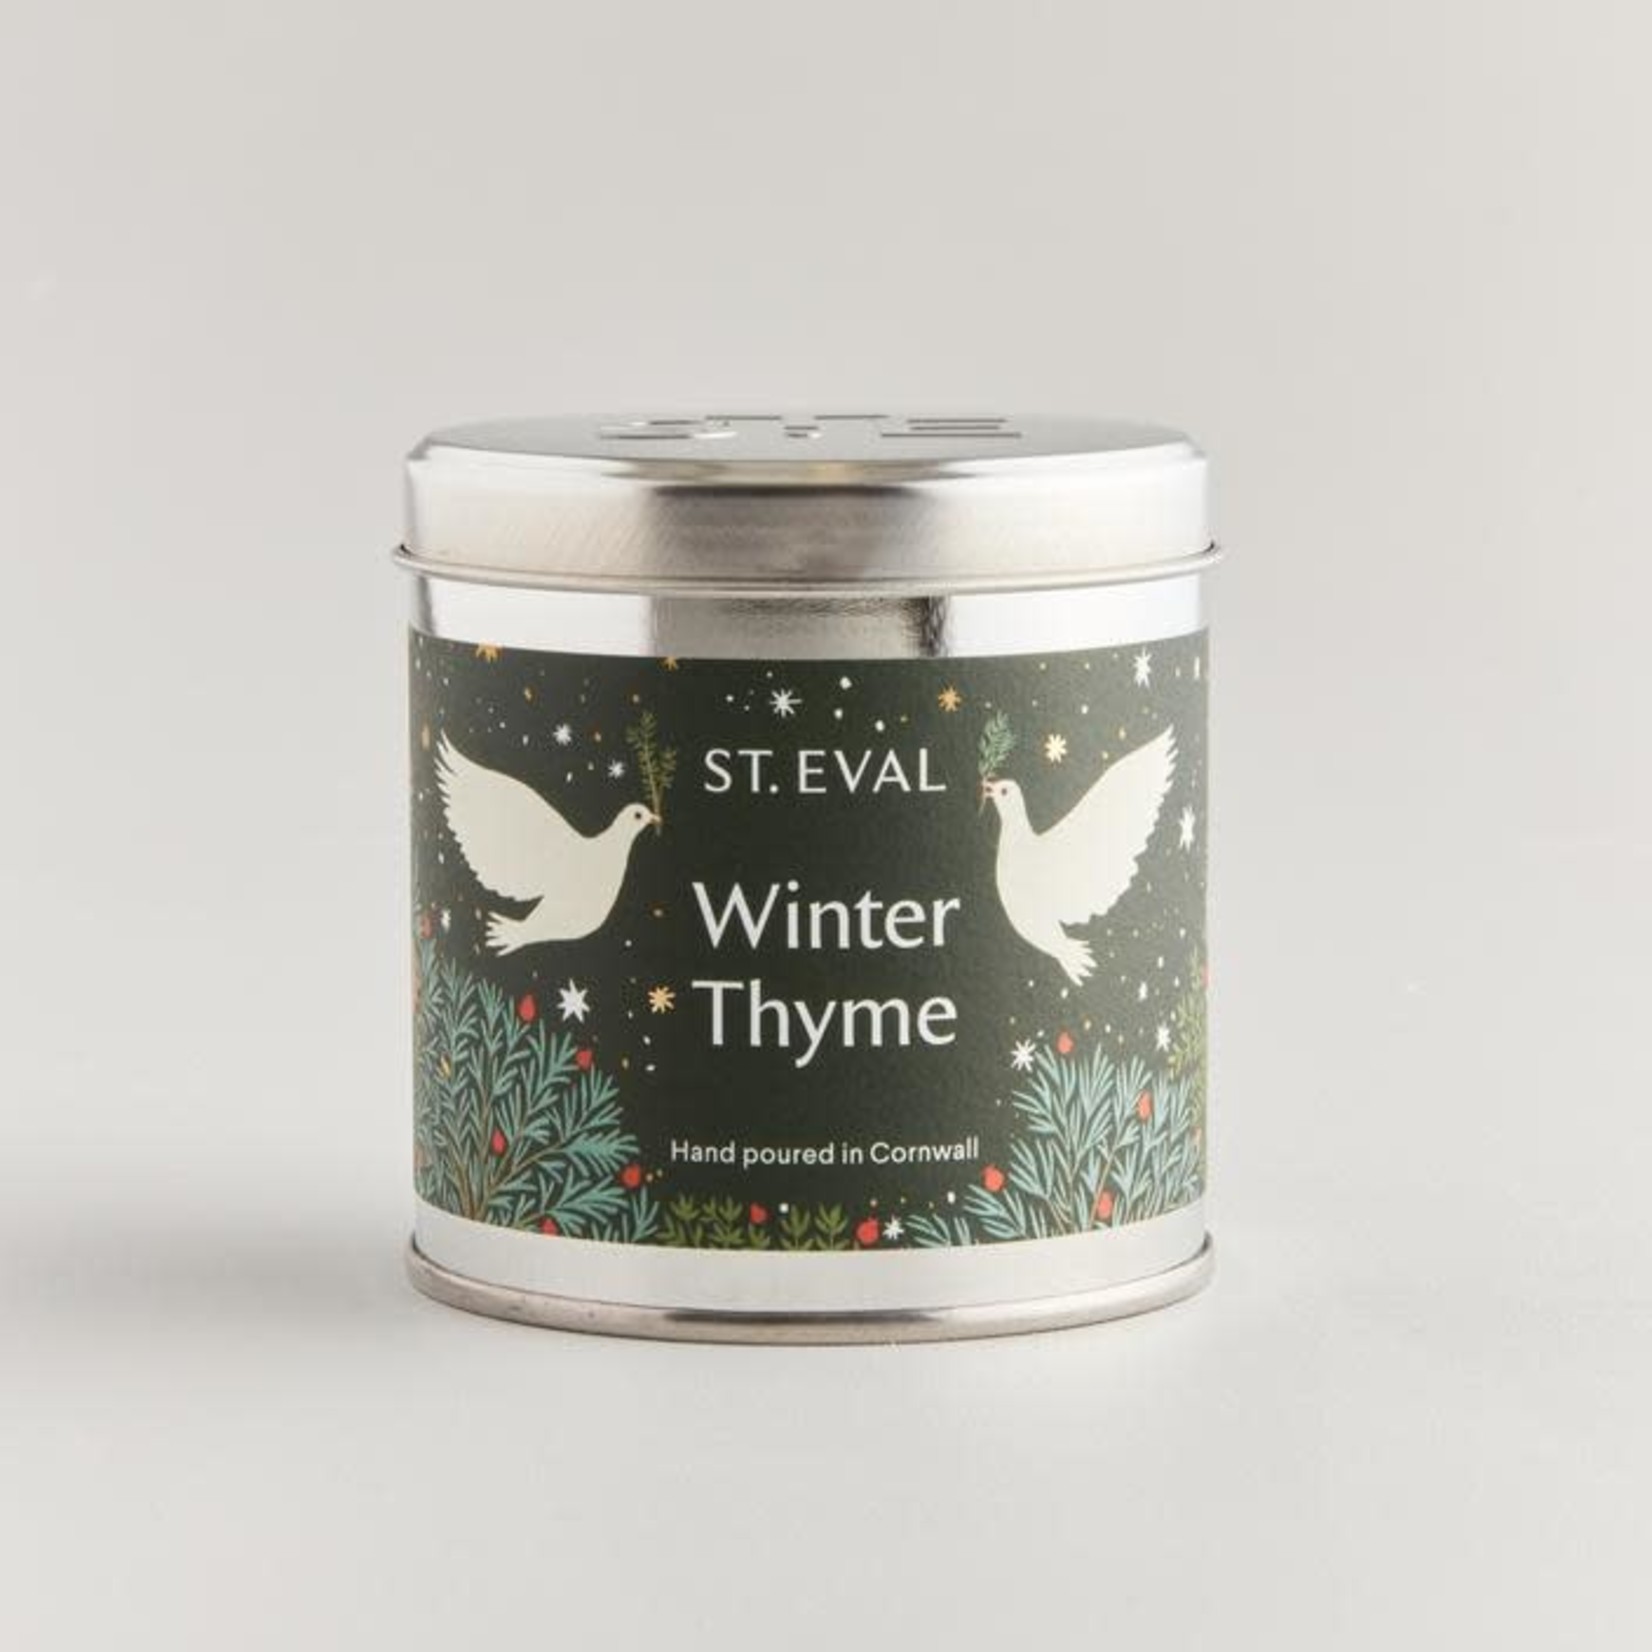 St. Eval St Eval Christmas Winter Thyme Tin Candle